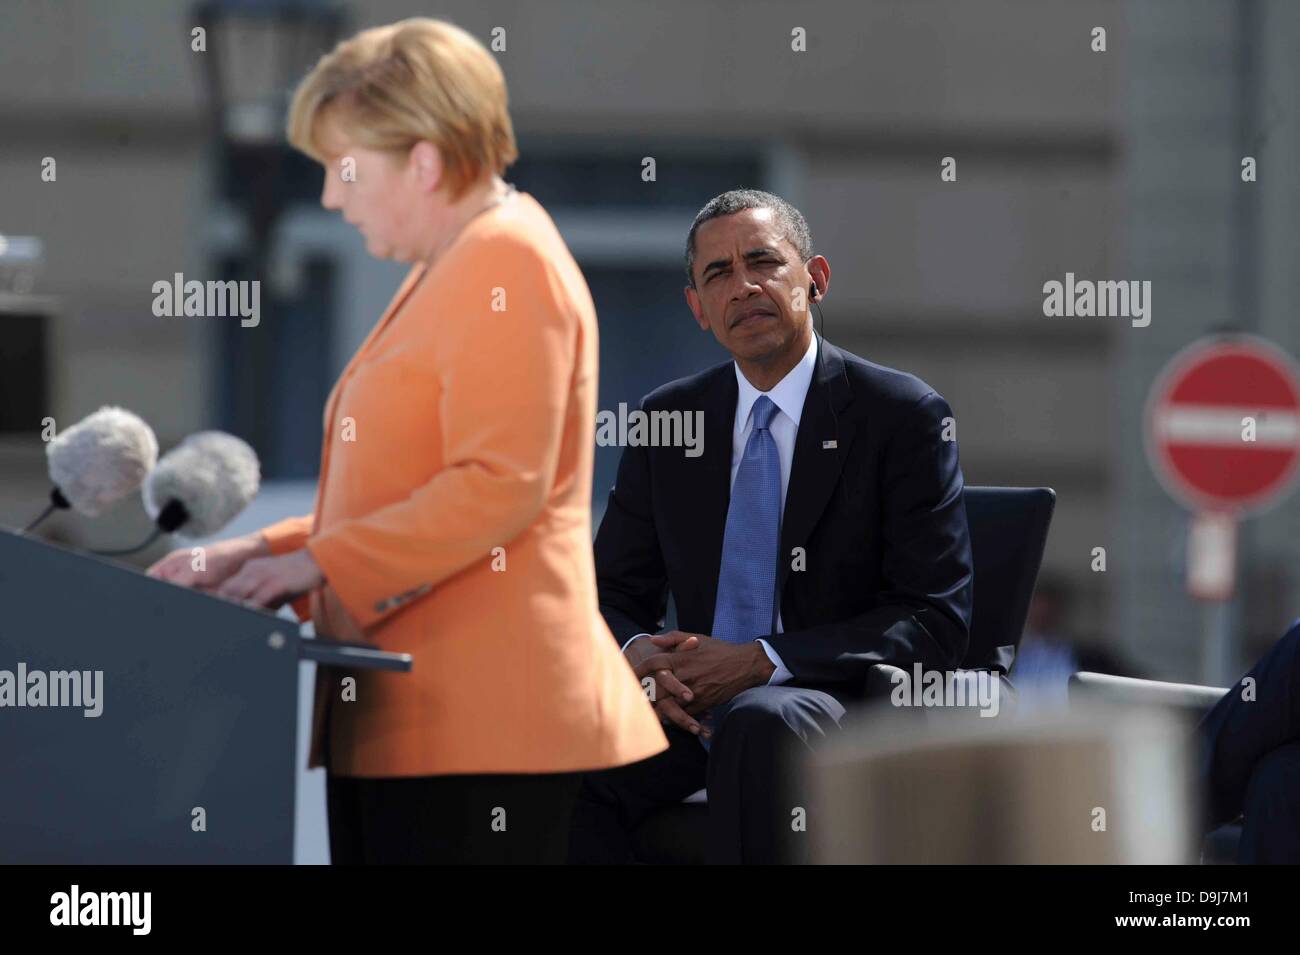 Us President Barack Hussein Obama and German Chancellor Angela Merkel Speech of U.S. President American / United States Barack Hussein Obama at the Brandenburg Gate in front of the Chosen 4000 18.06.2013 Berlin/picture alliance/dpa/Alamy Live News Stock Photo